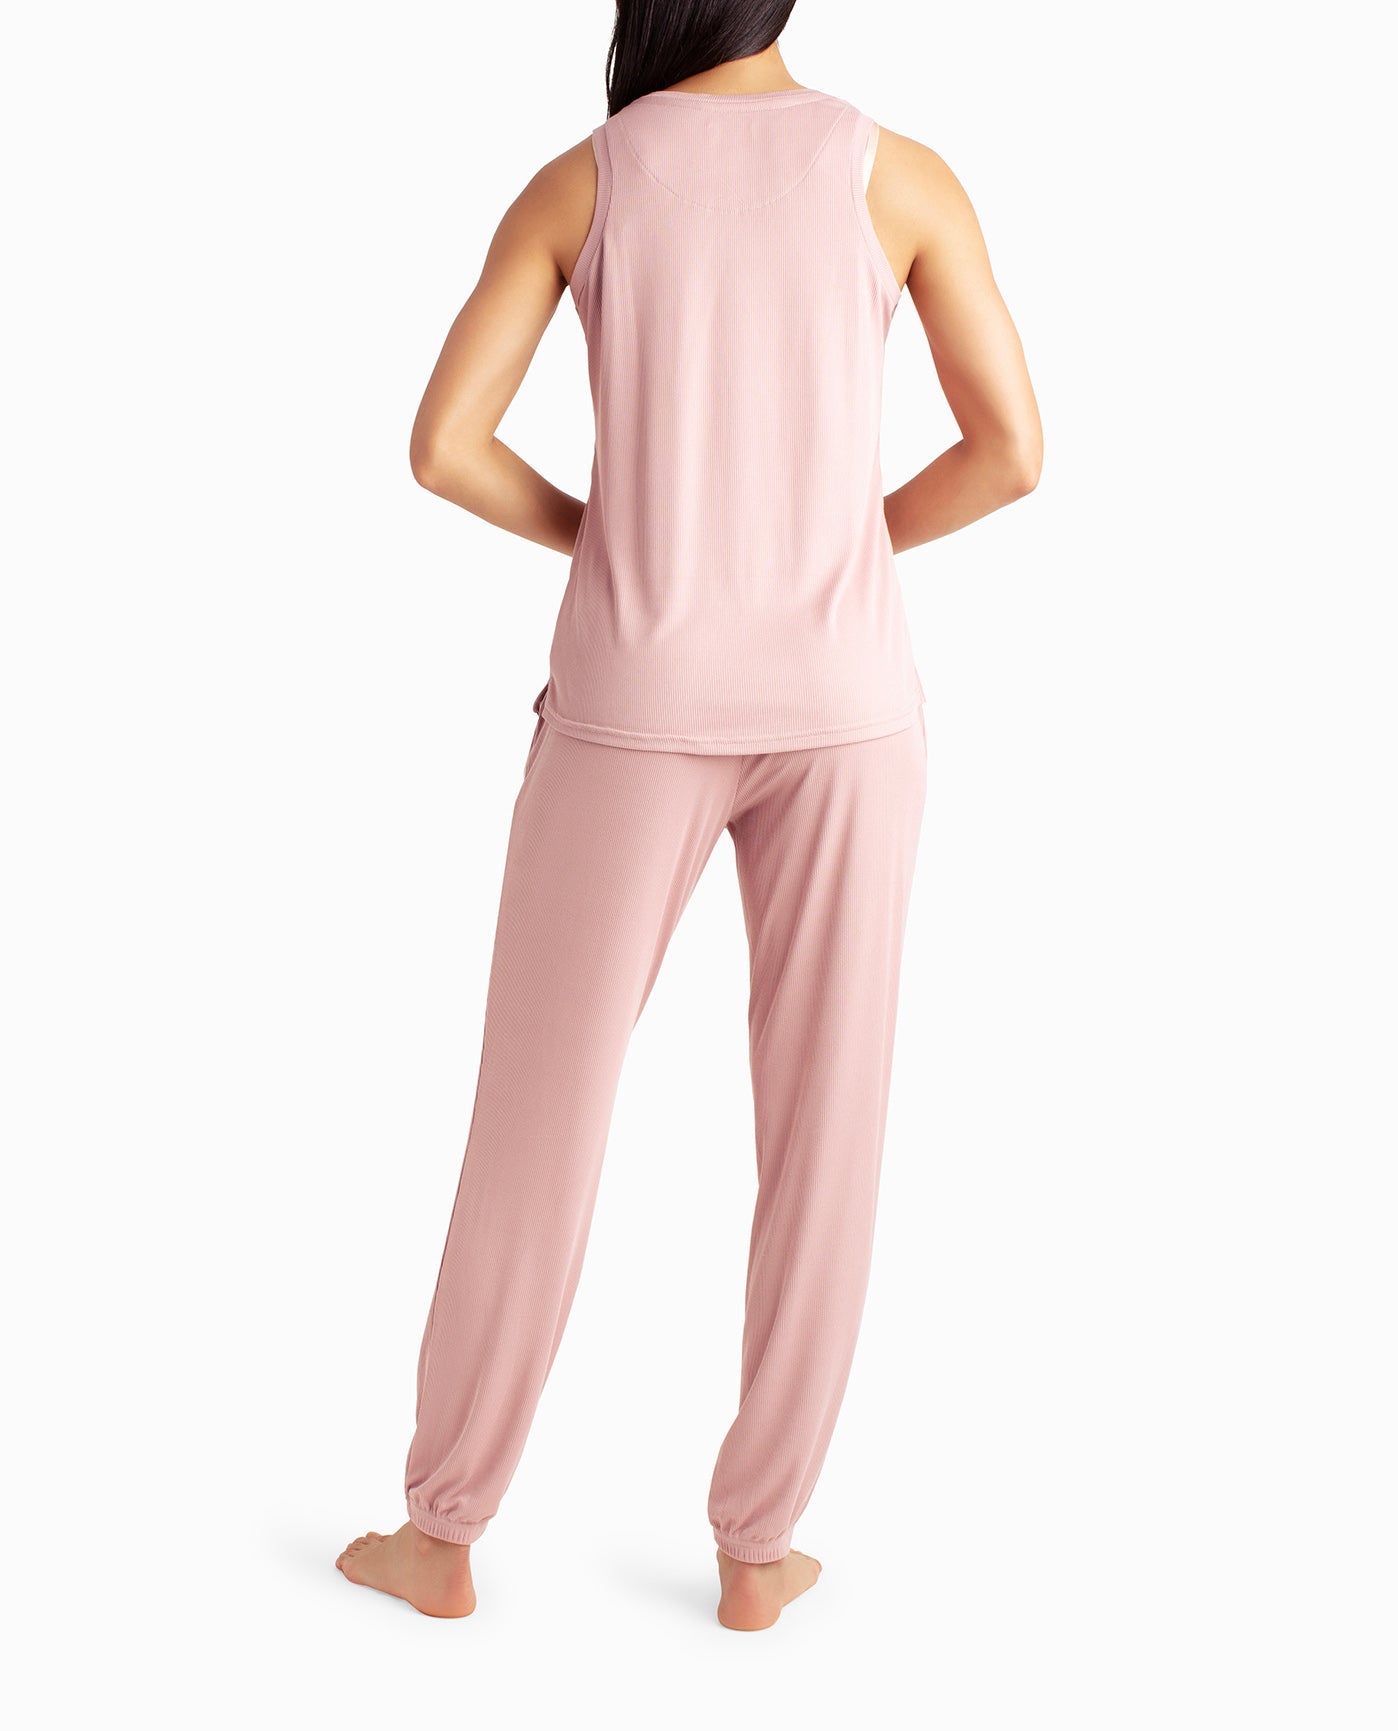 BACK OF RIBBED HIGH NECK TANK AND GYM PANT TWO-PIECE SLEEPWEAR SET | Gemini